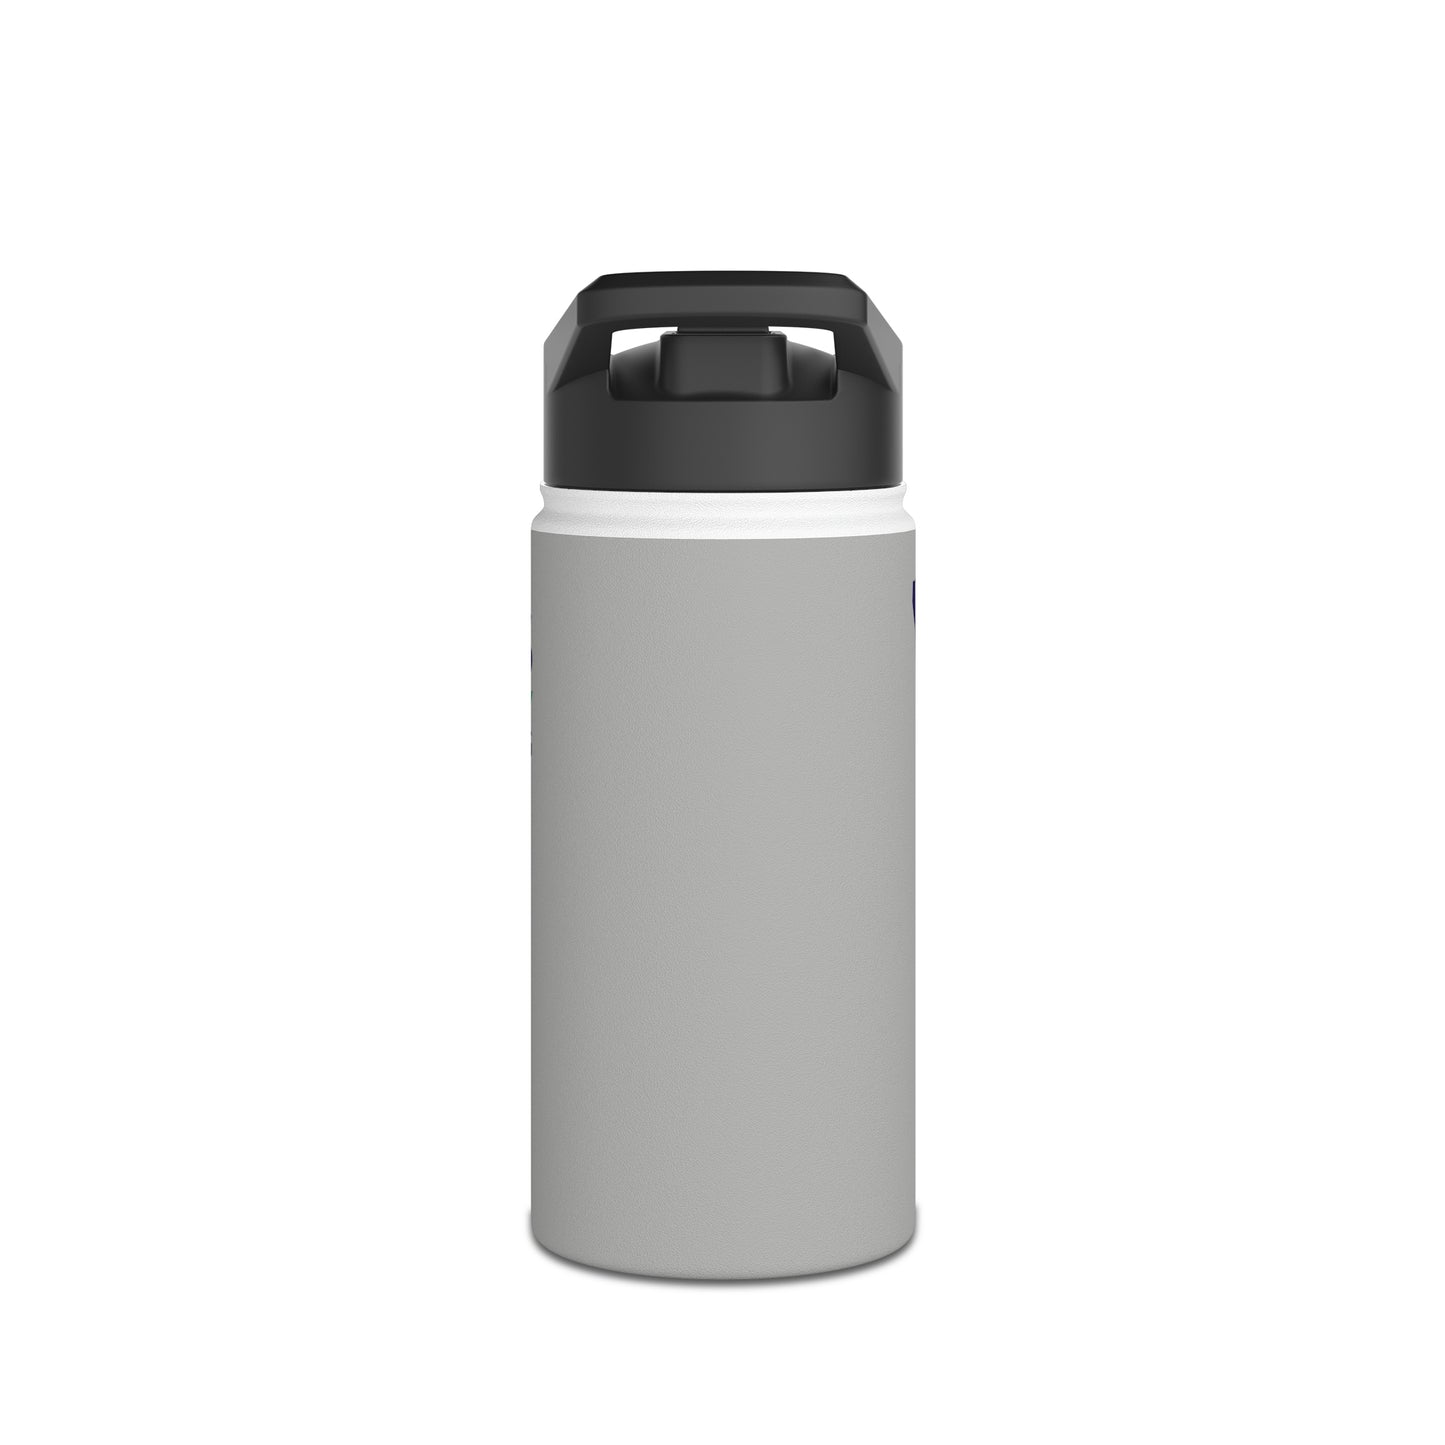 Edwards Managed Technology Stainless Steel Water Bottle, Standard Lid